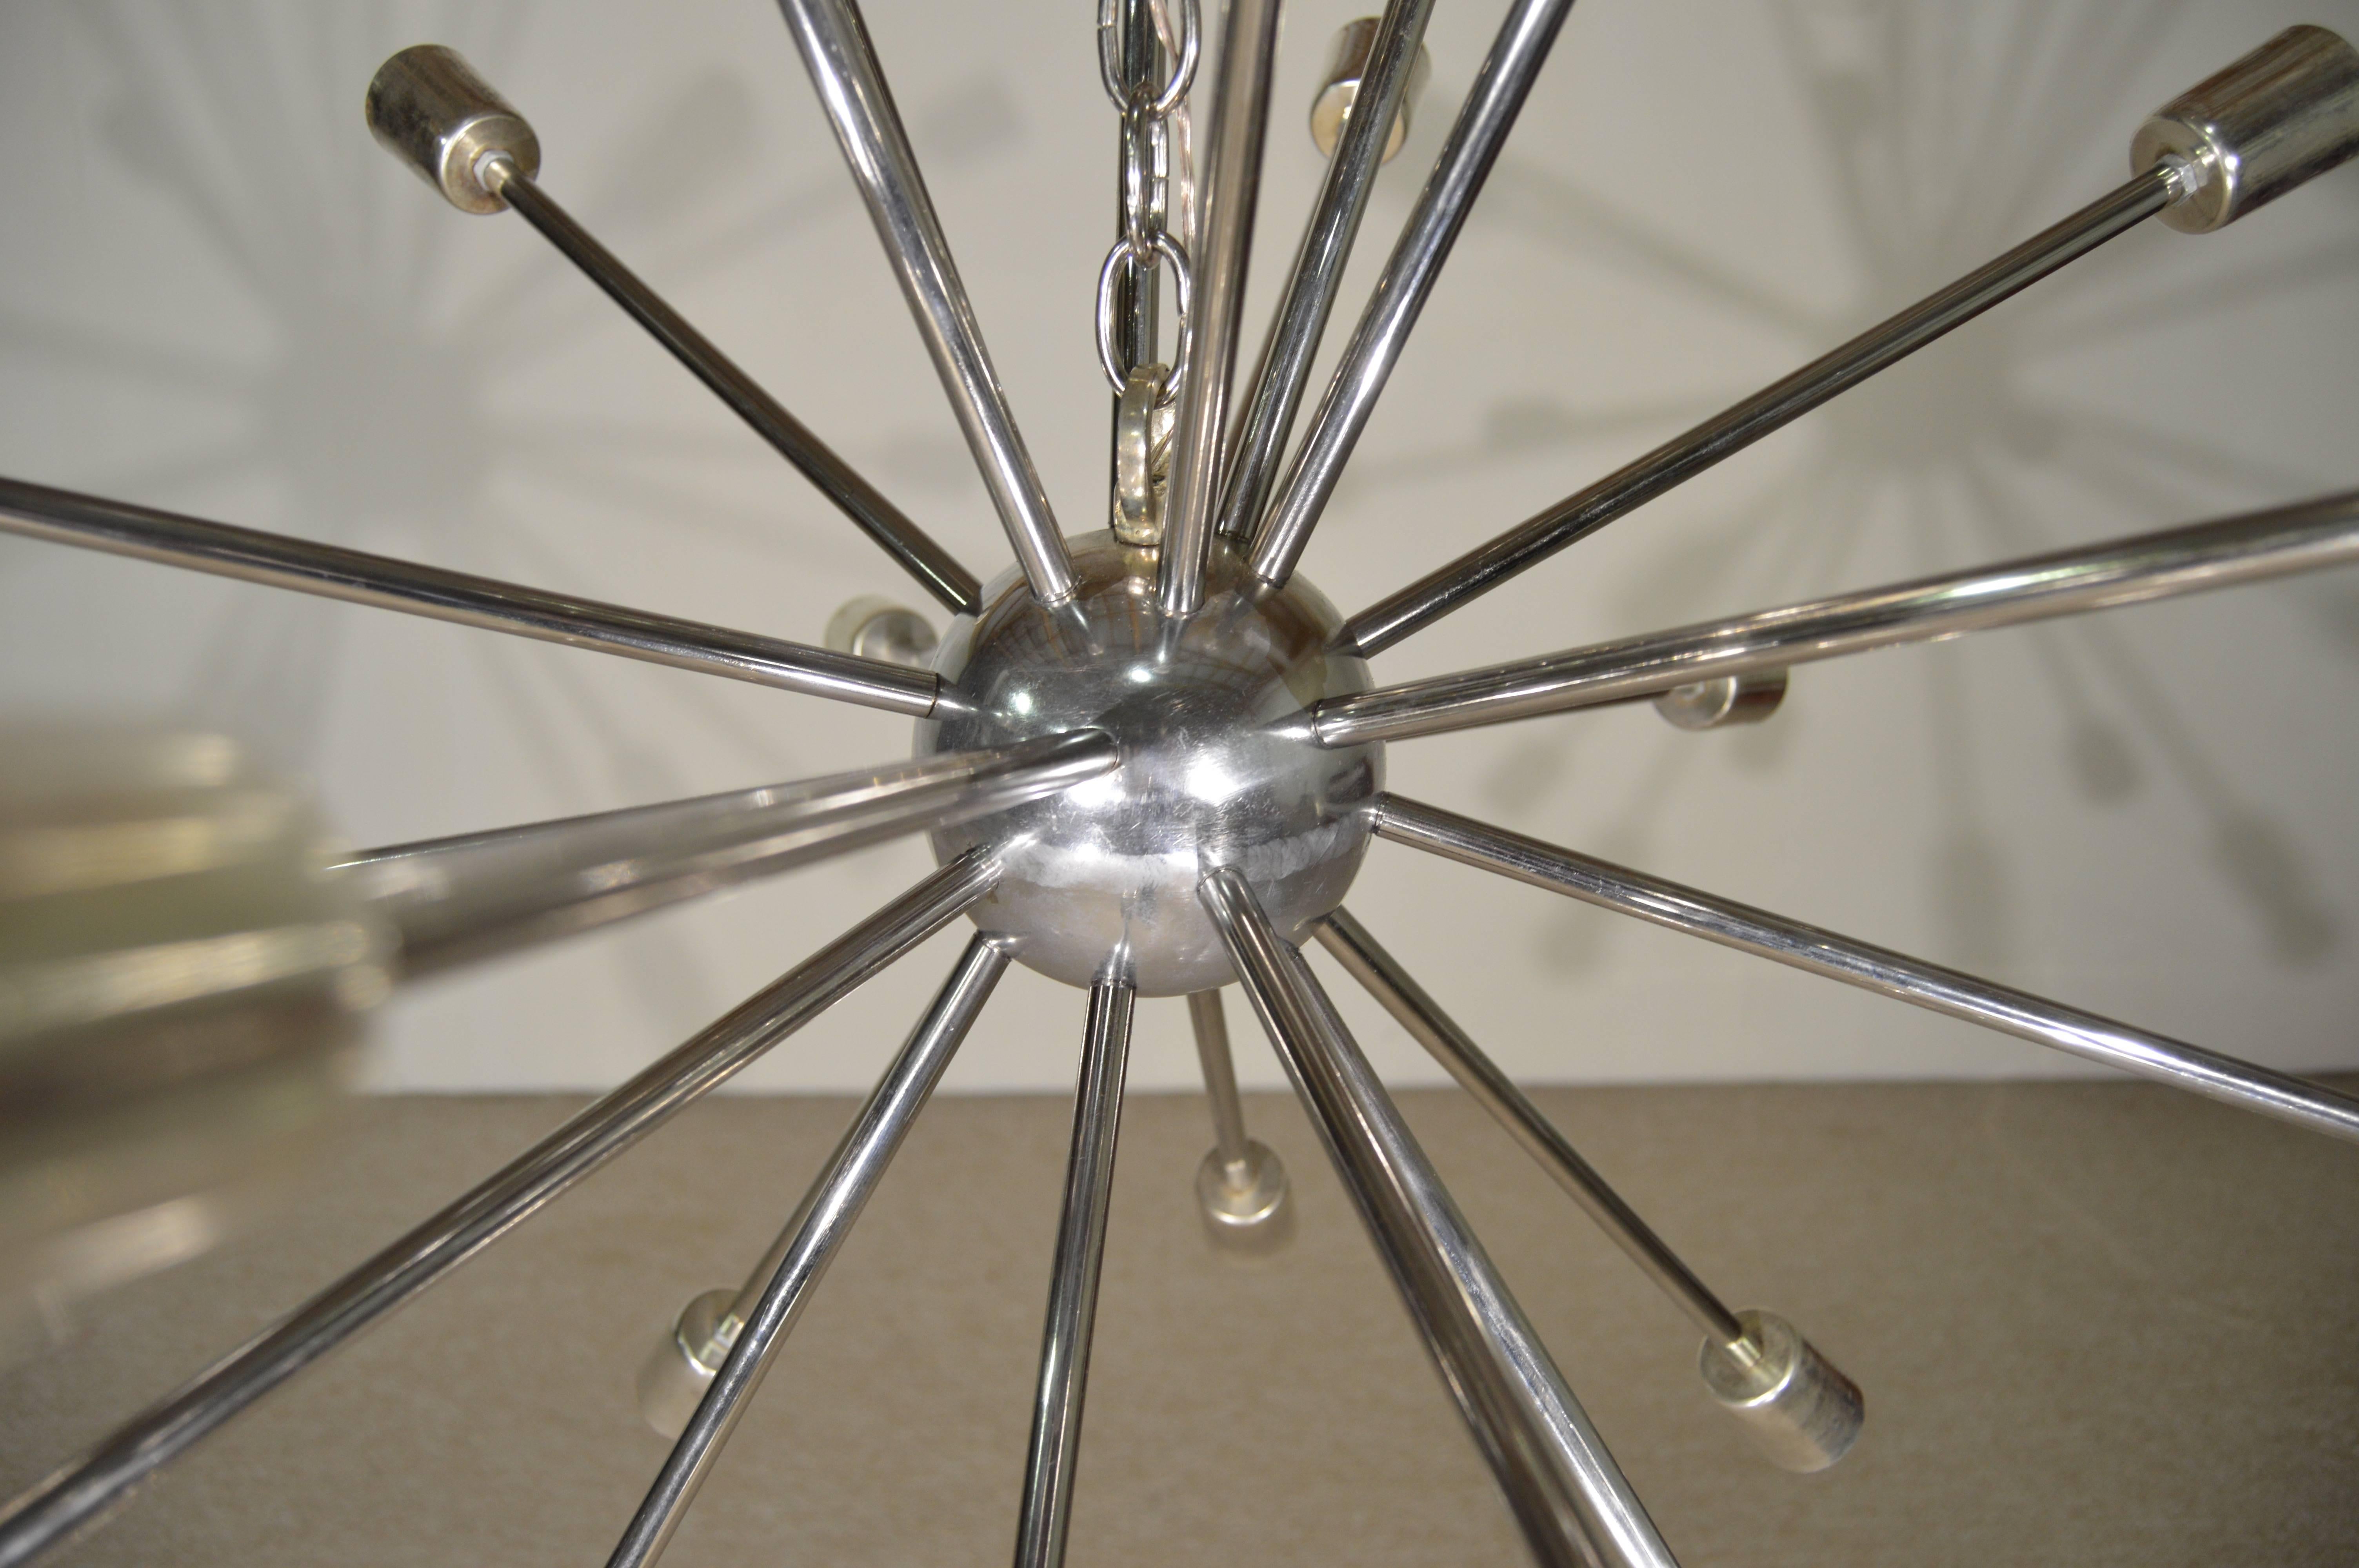 Spanning 32" in diameter, this beautiful early example of the Classic Sputnik chandelier design is a true statement piece. Dawning 23 bulb arms this light is magnificent when lit. (Please excuse us for not having enough bulbs to mount for